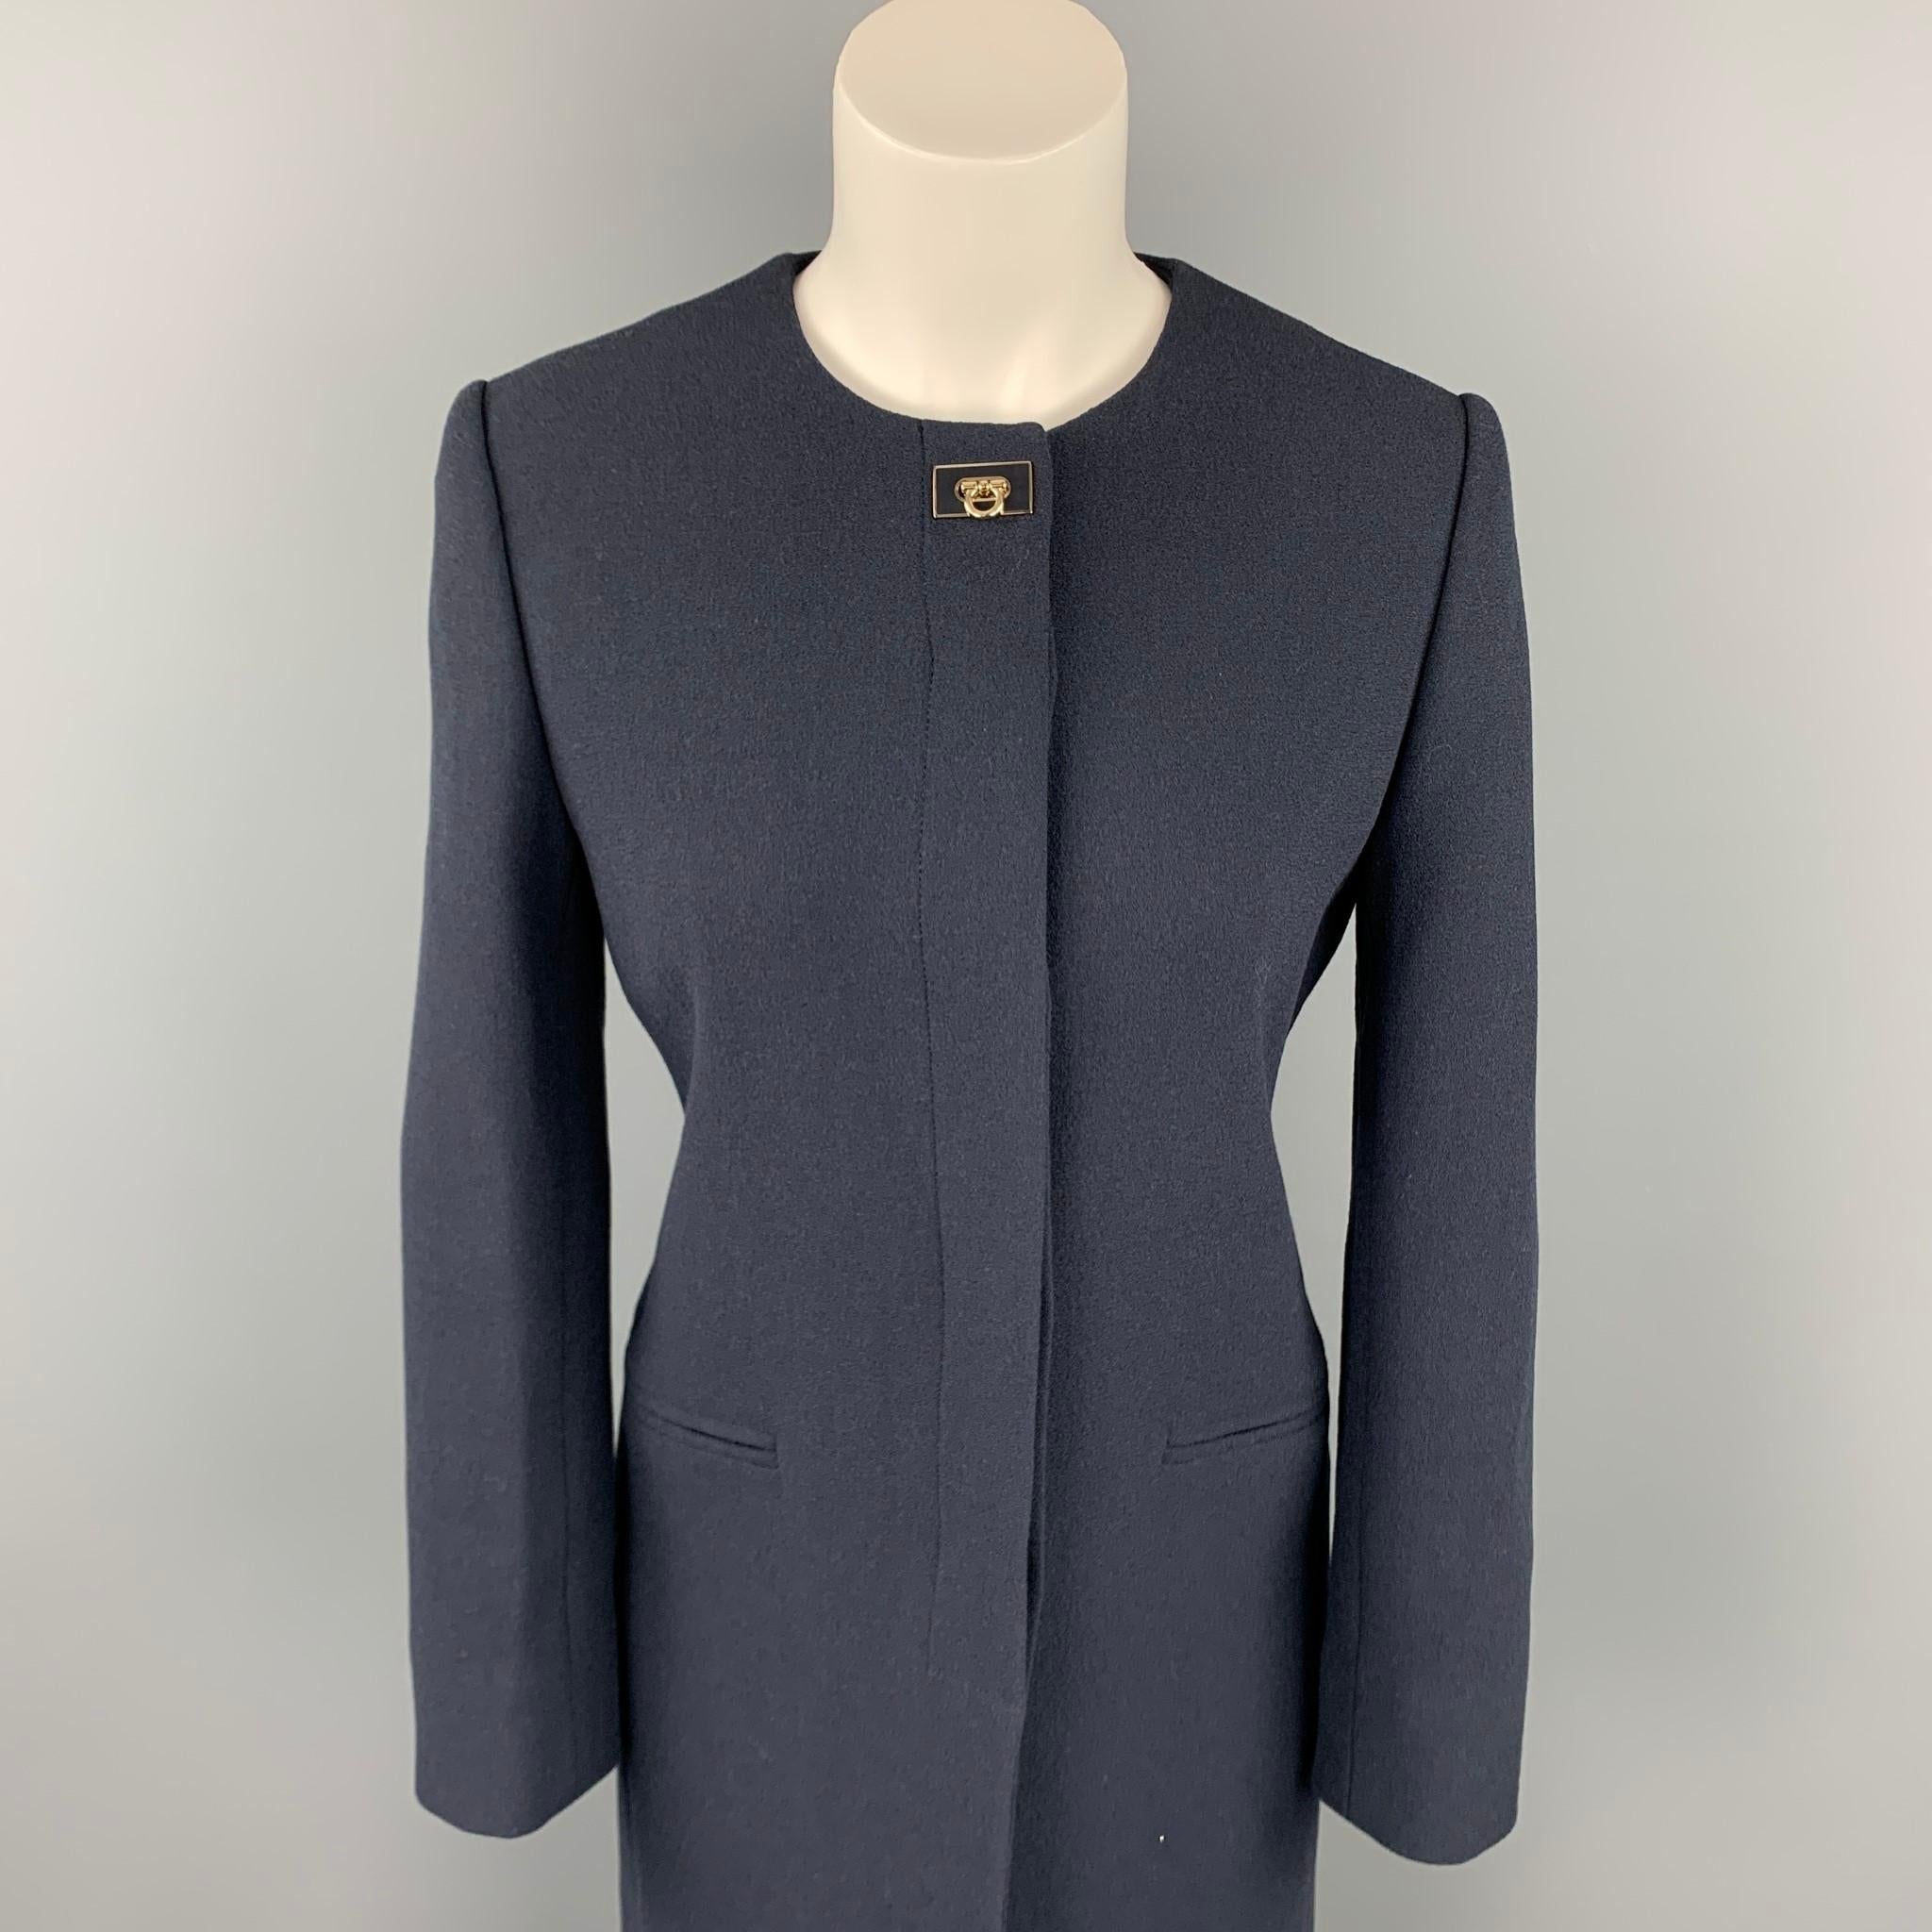 SALVATORE FERRAGAMO coat comes in a navy wool / silk with a full print liner featuring a collarless style, back strap, slit pockets, and a hidden button closure. Made in Italy.

New With Tags. 
Marked: IT 38
Original Retail Price: